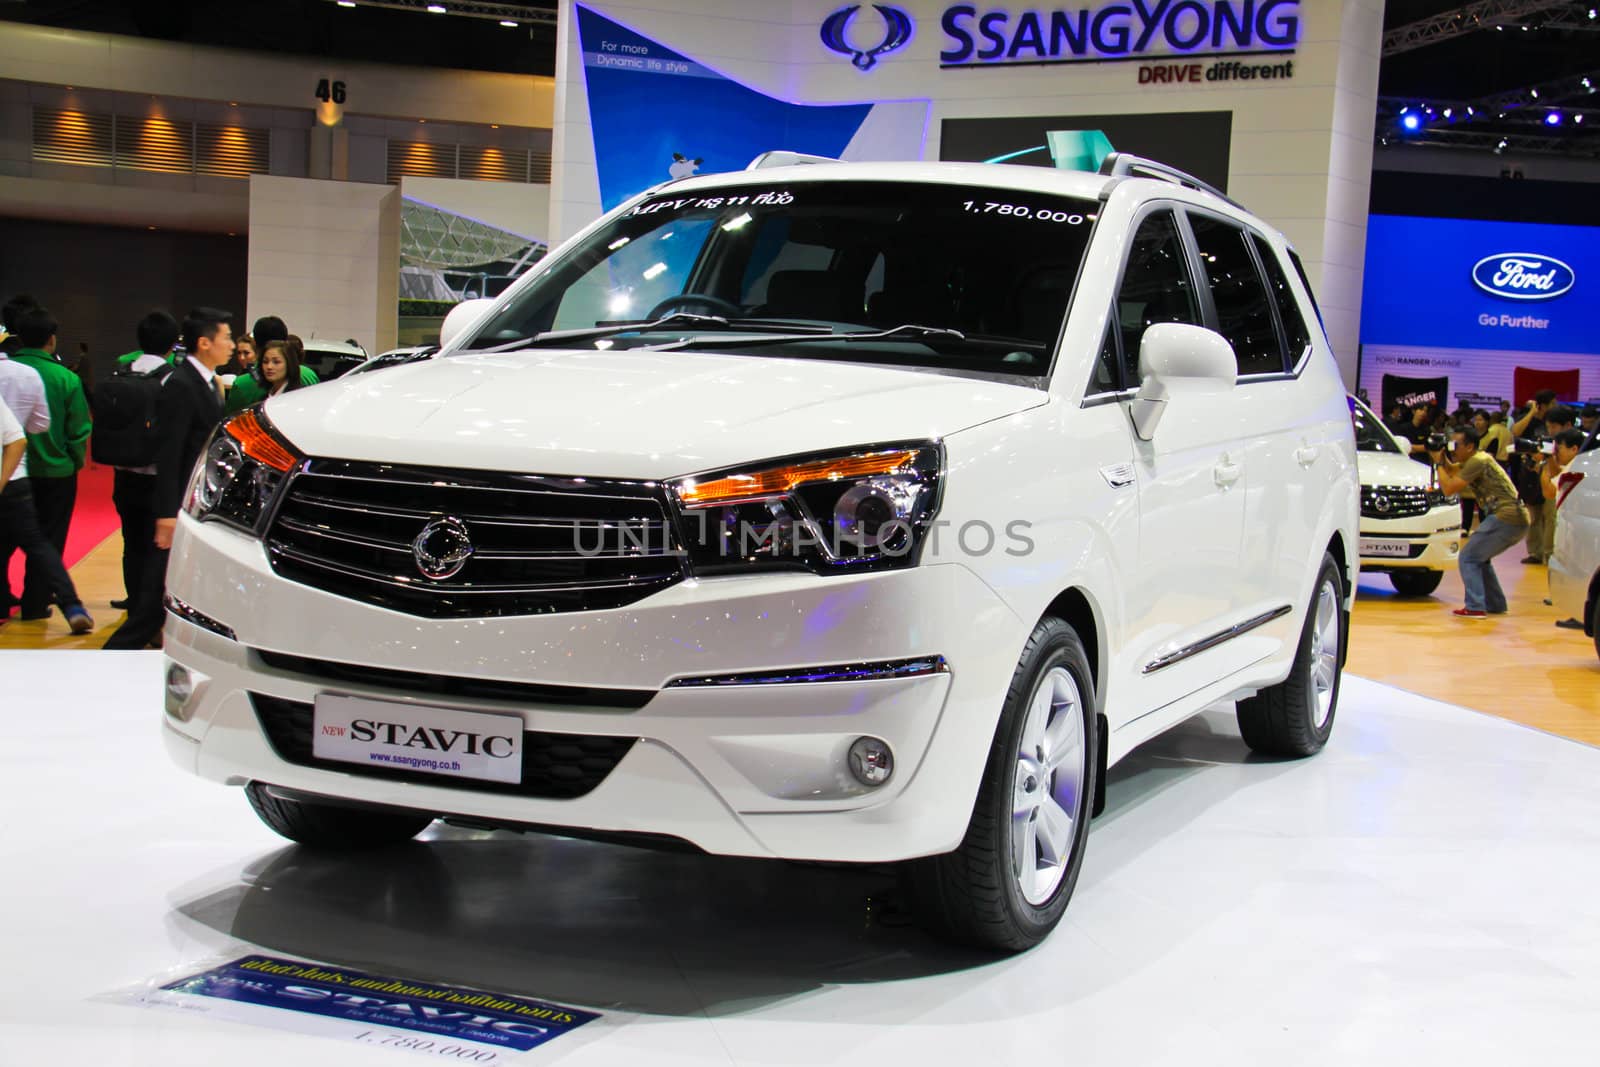 Ssangyong Stavic by coleorhiza